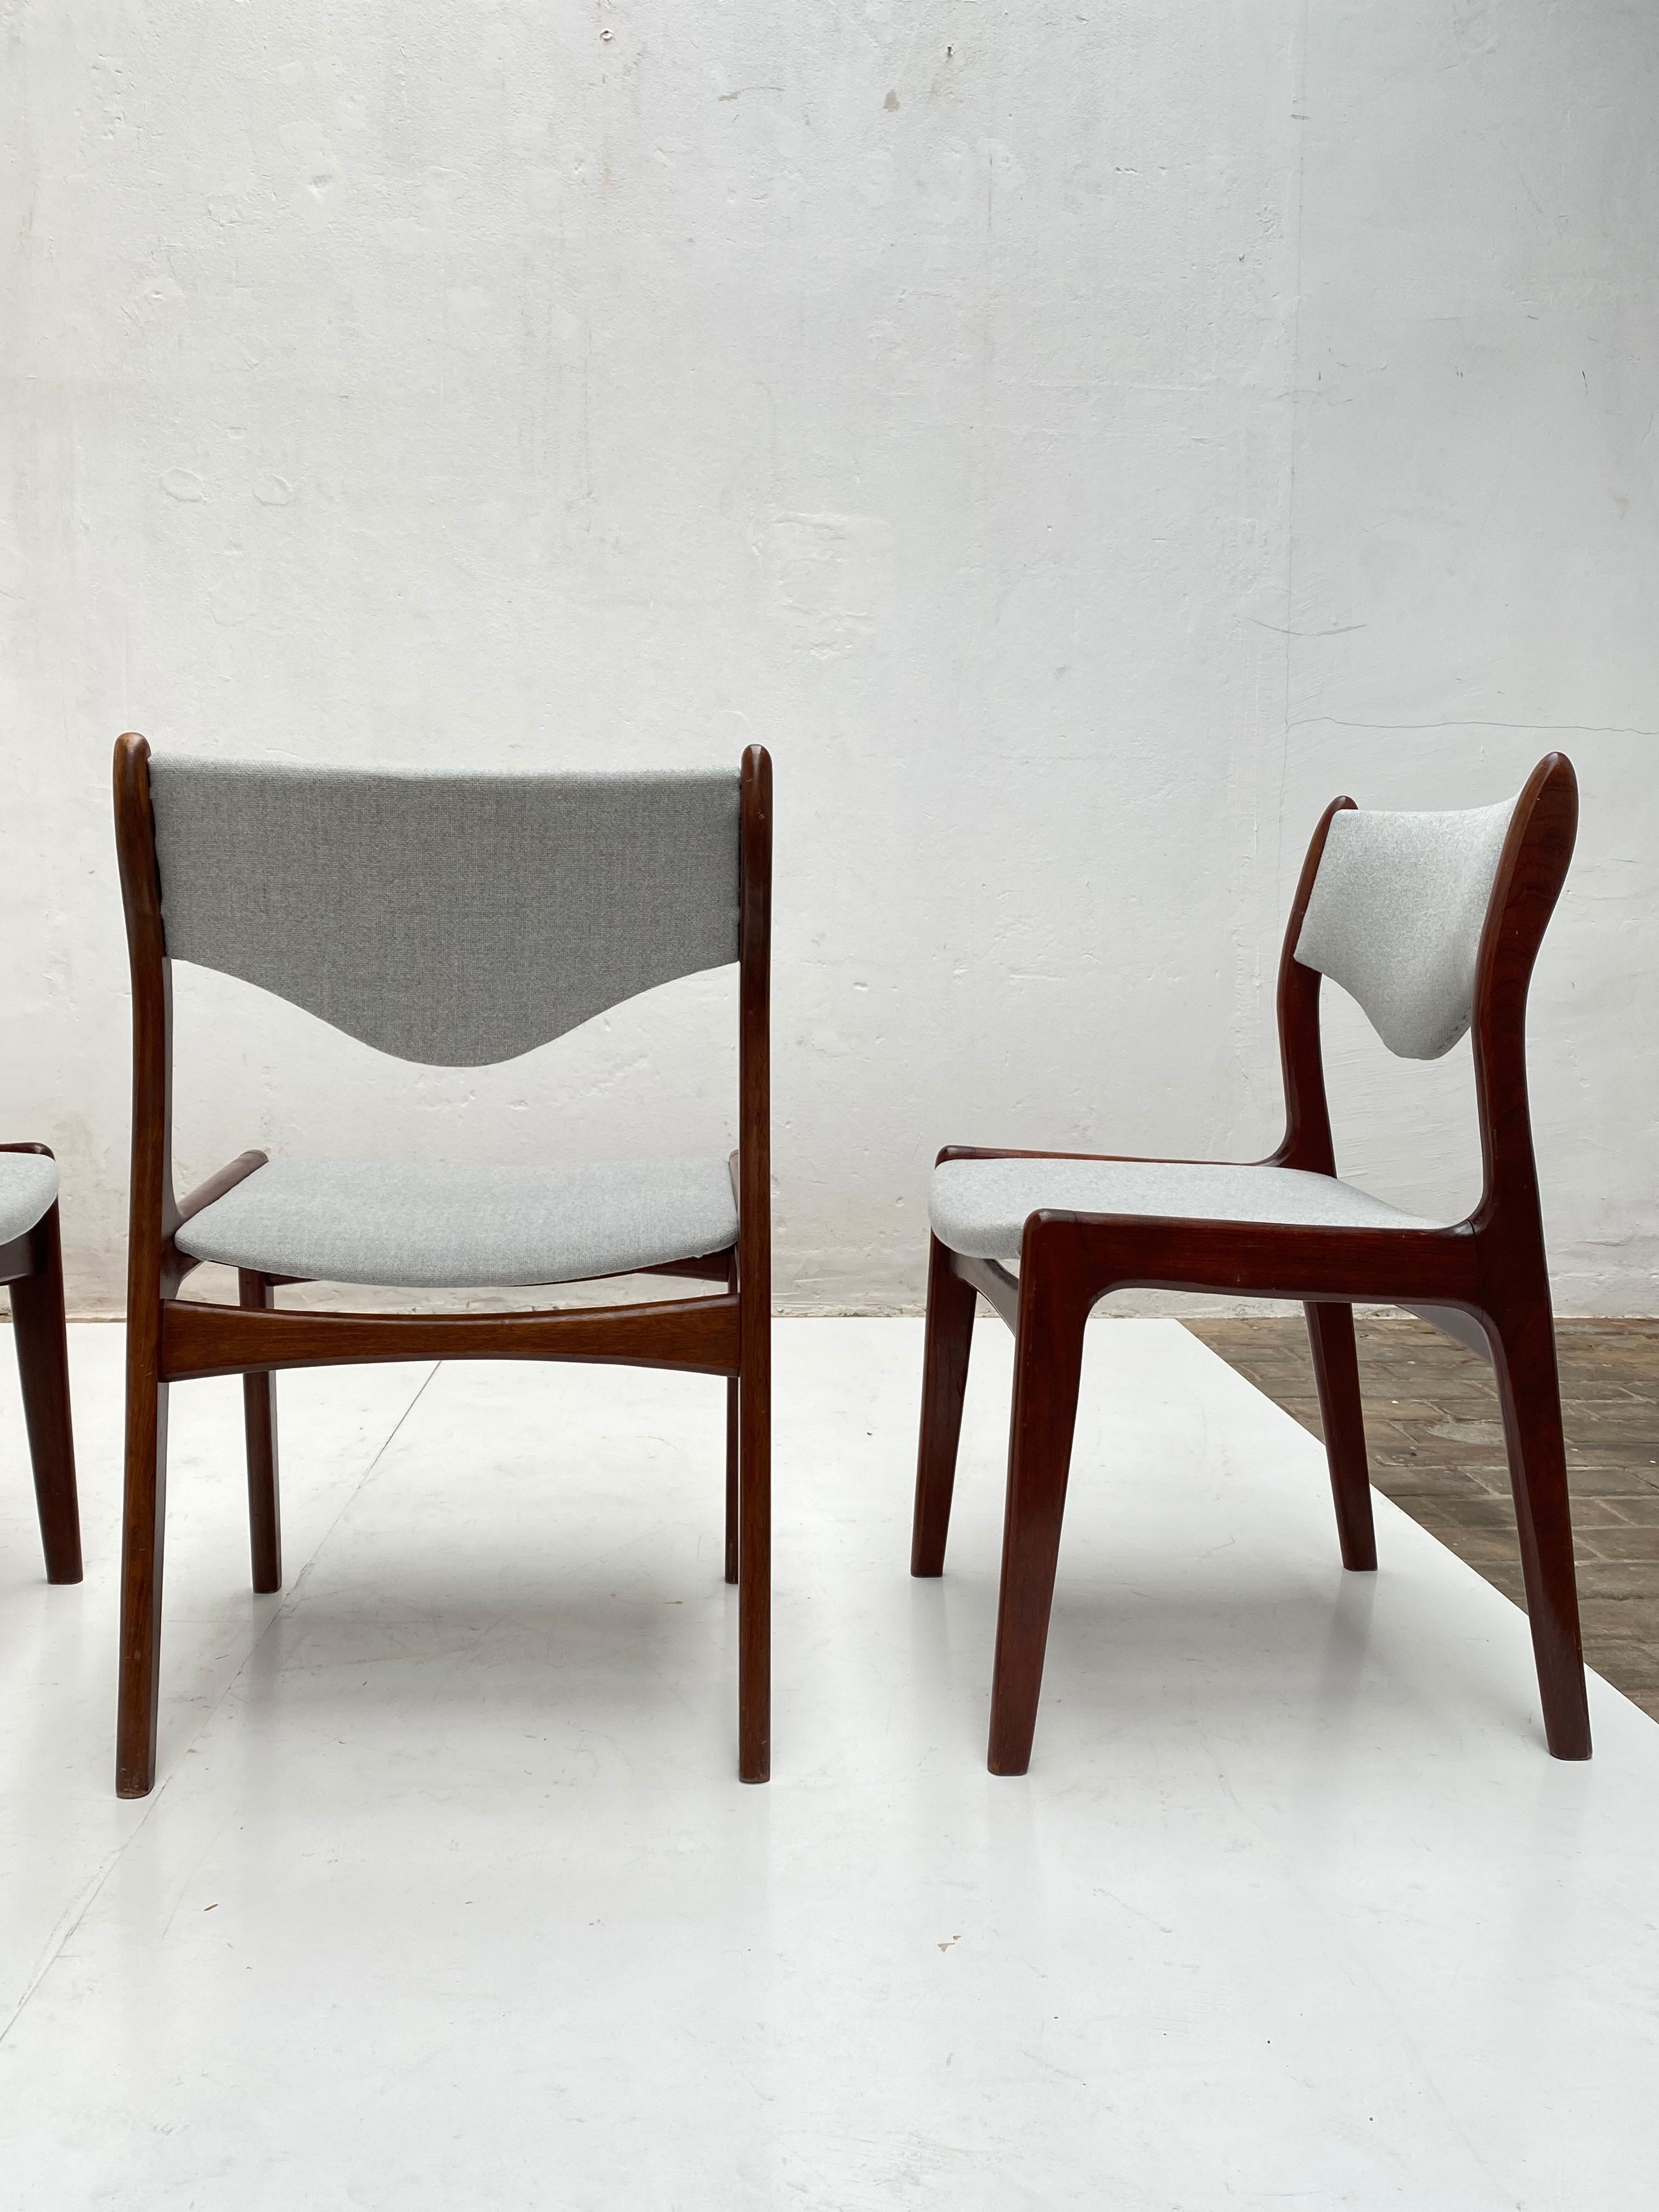 Johannes Andersen Set of 4 Solid Teak Dining Chairs produced by Mahjongg, 1960's For Sale 3